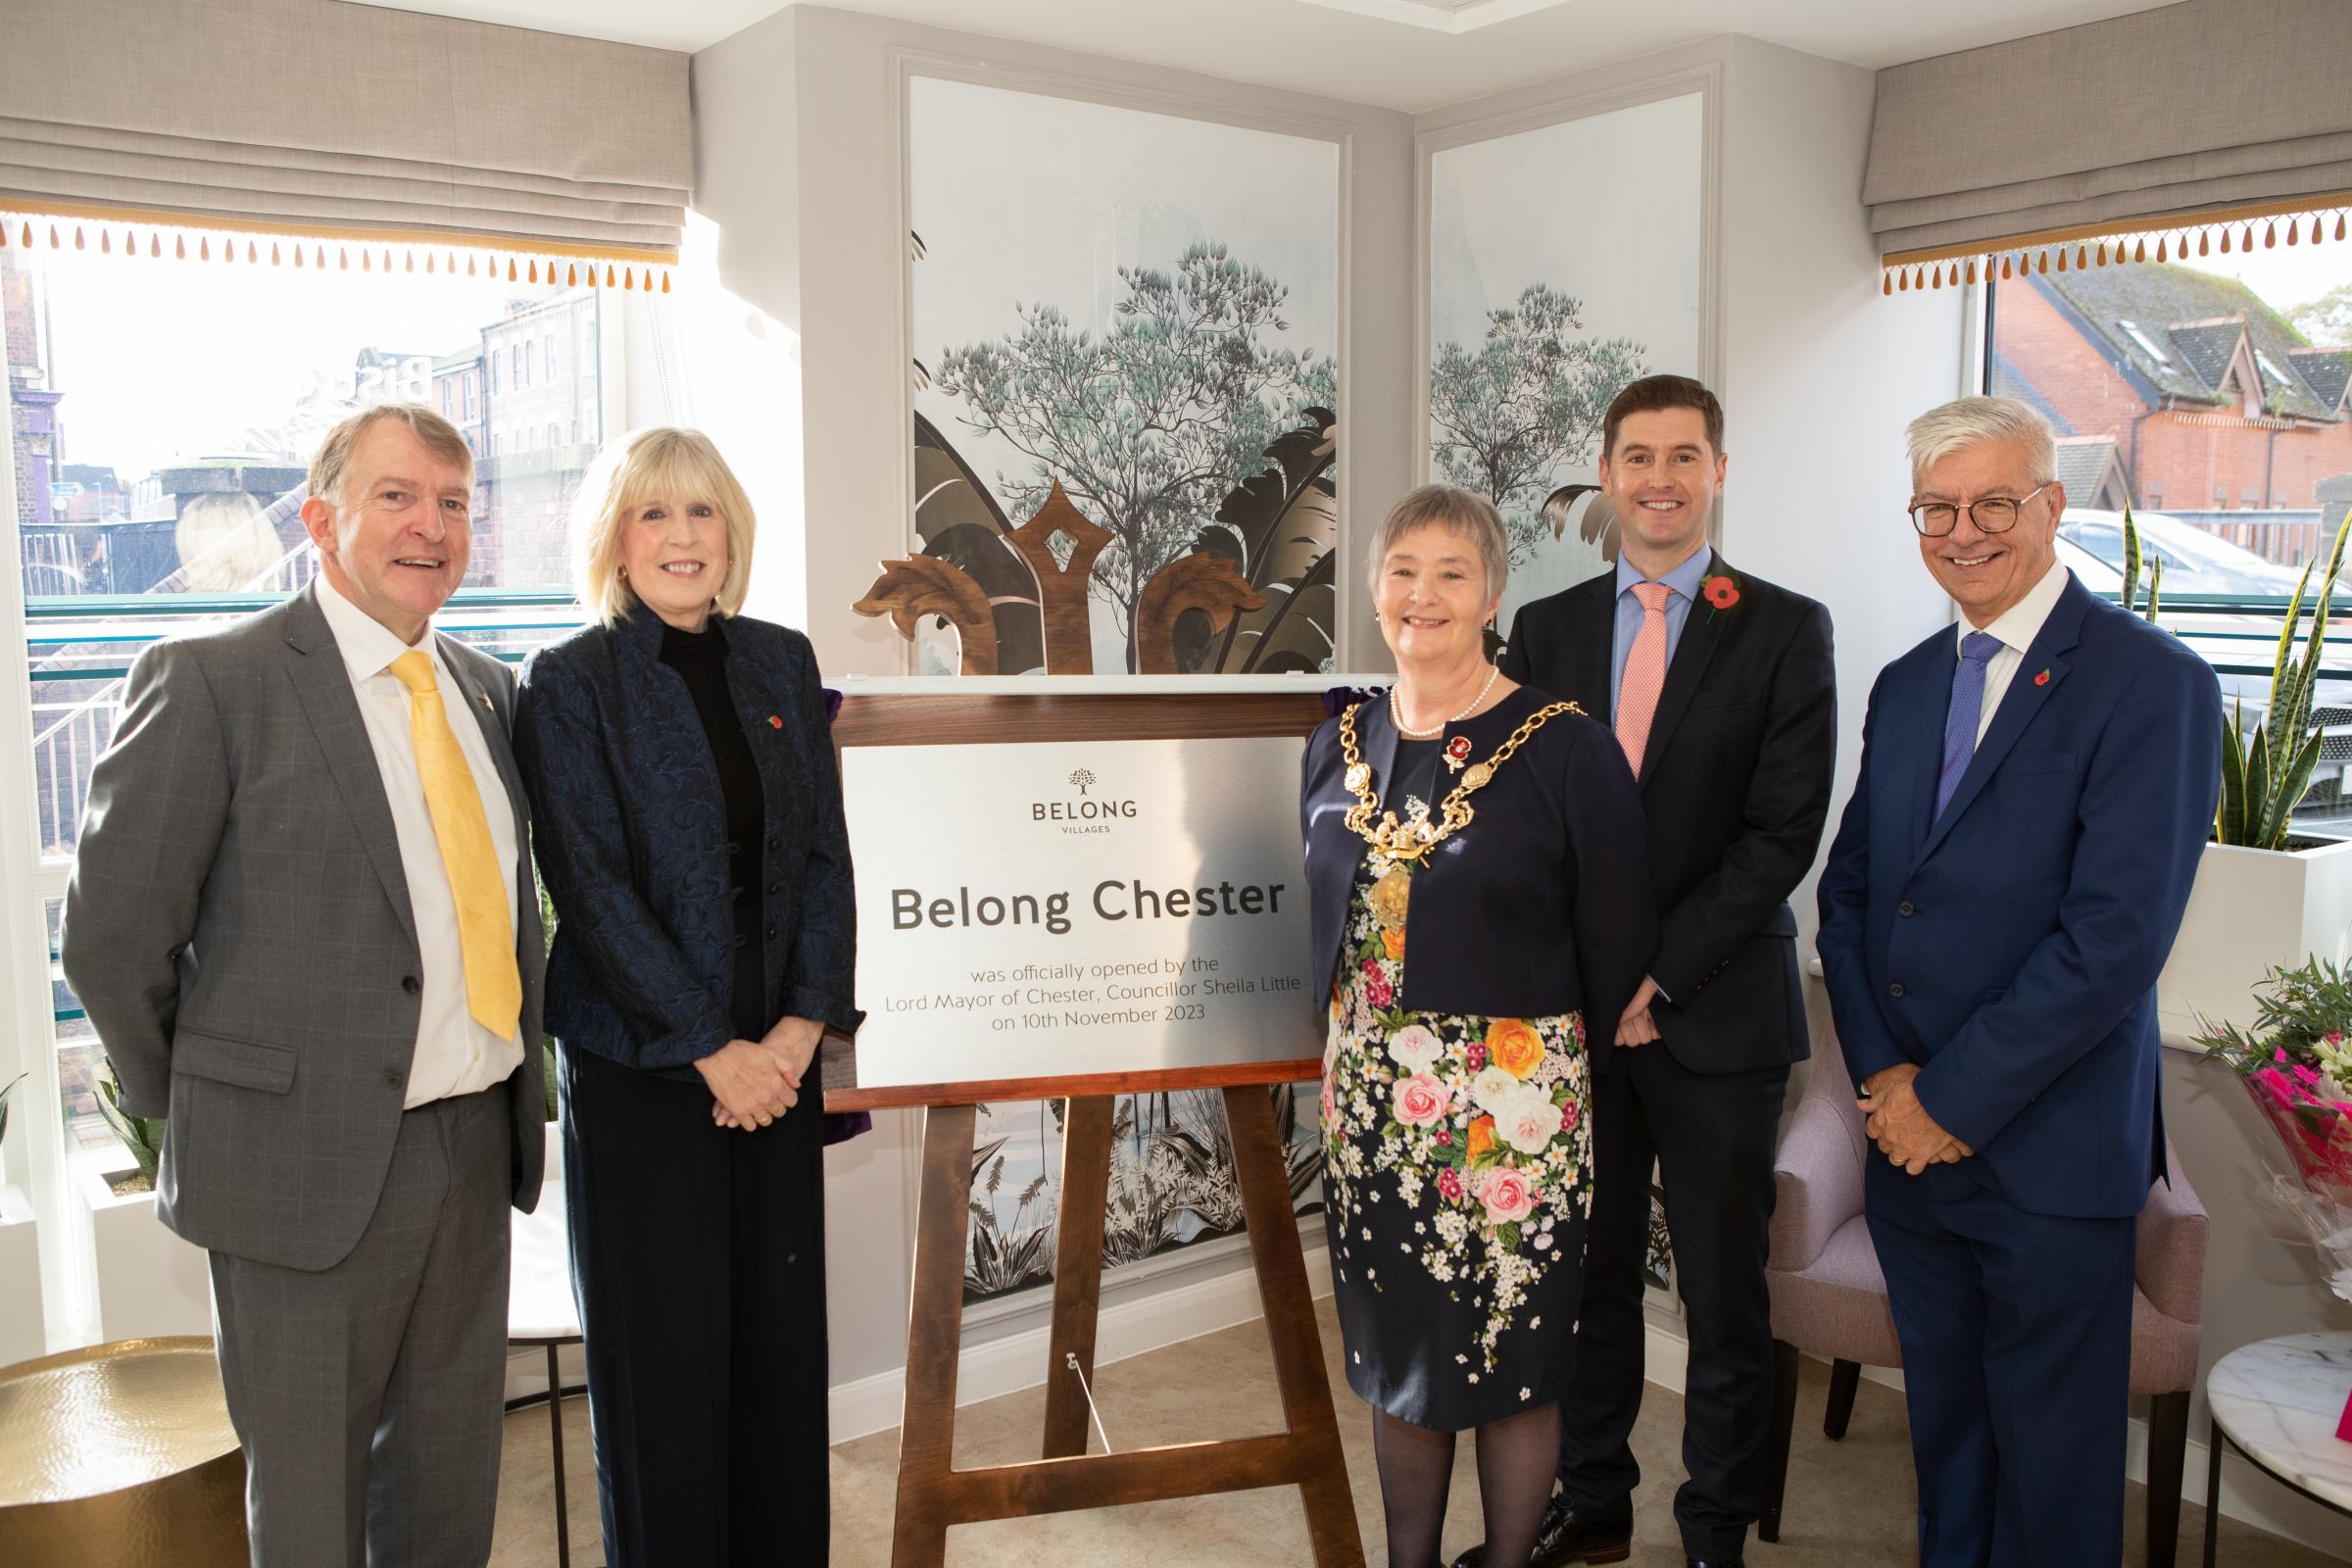 Belong Chester General Manager, Patrick Butler, Ready Generation co-founder Sue Egersdorff, the Lord Mayor of Chester, Sheila Little, Belong CEO, Martin Rix, and Chair of the Belong Board, Robert Armstrong.